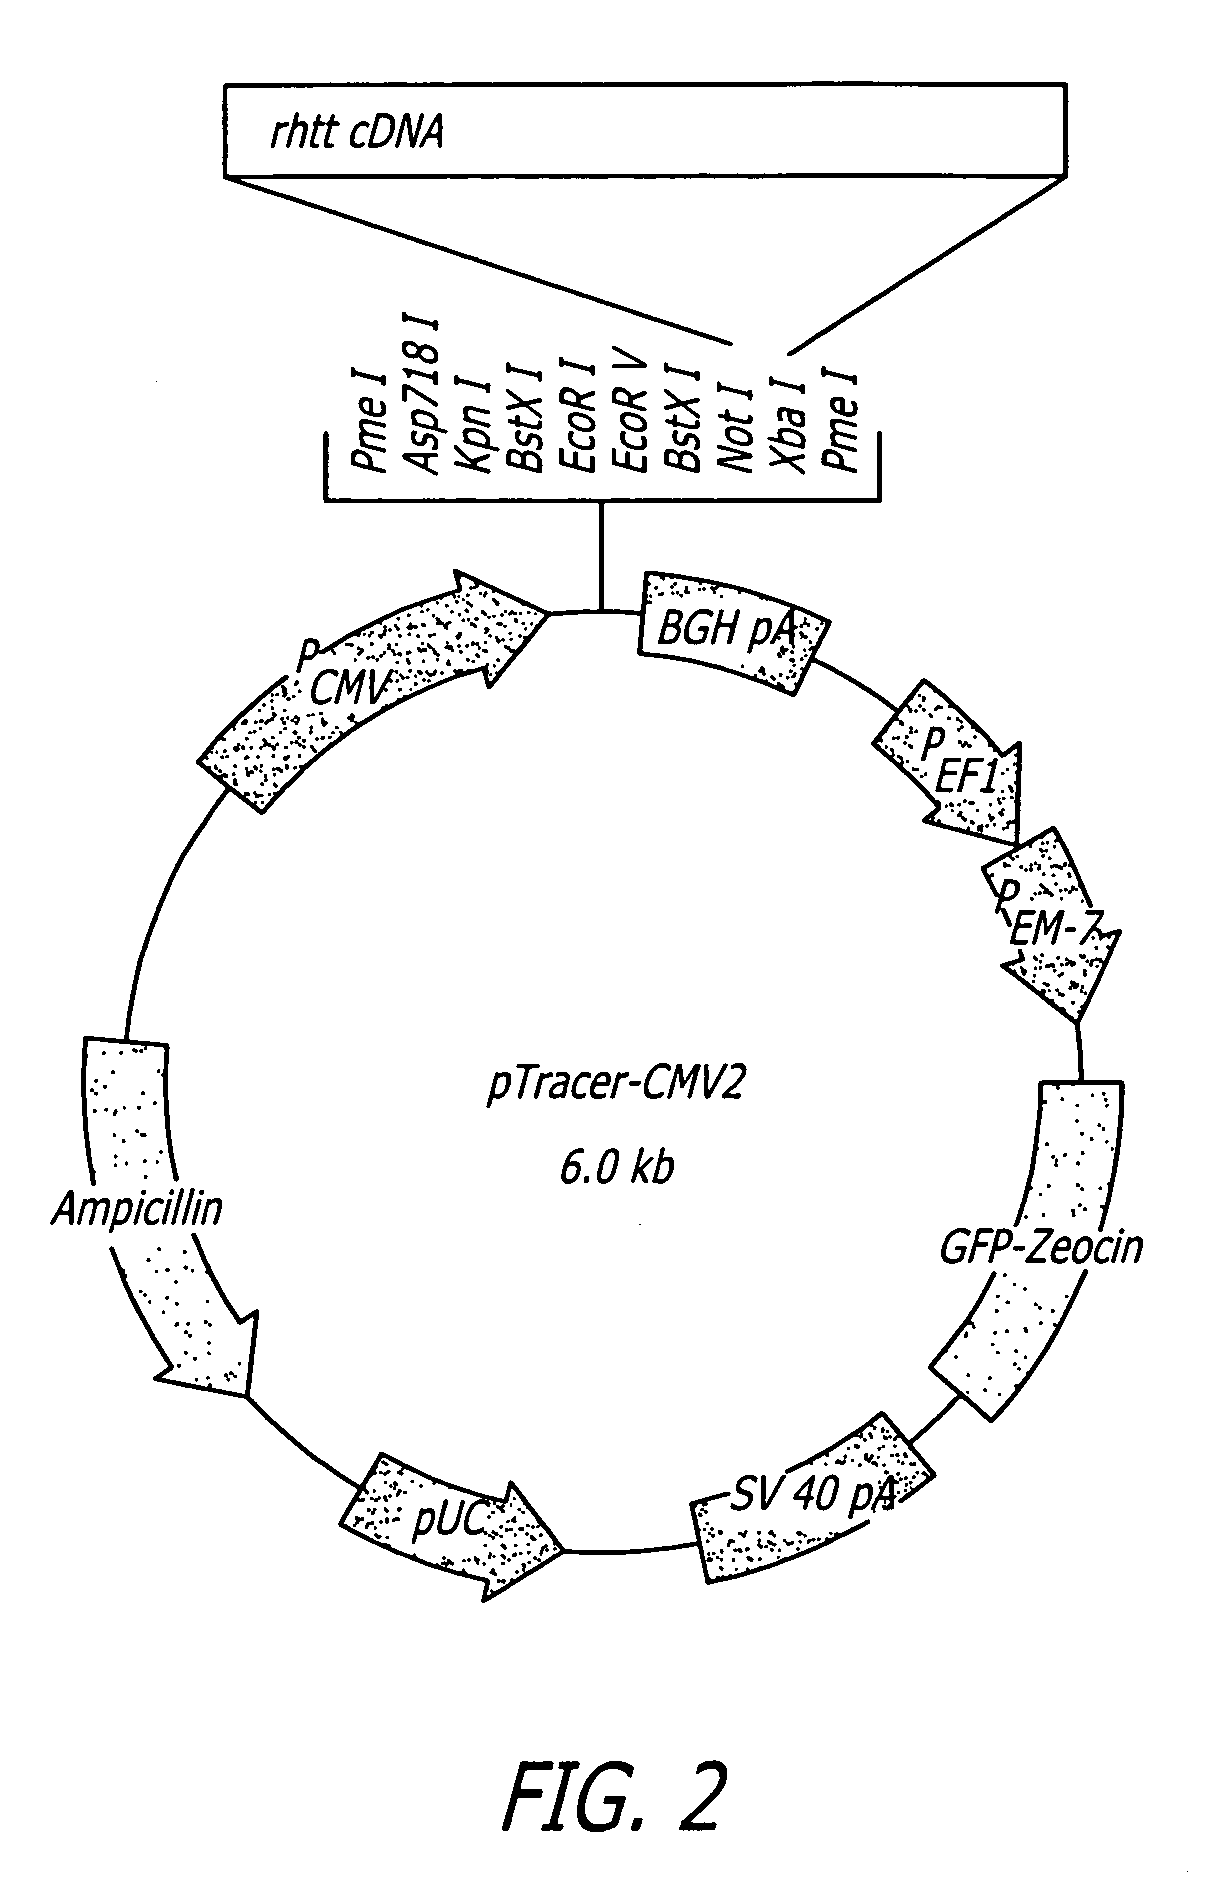 Methods and sequences to preferentially suppress expression of mutated huntingtin